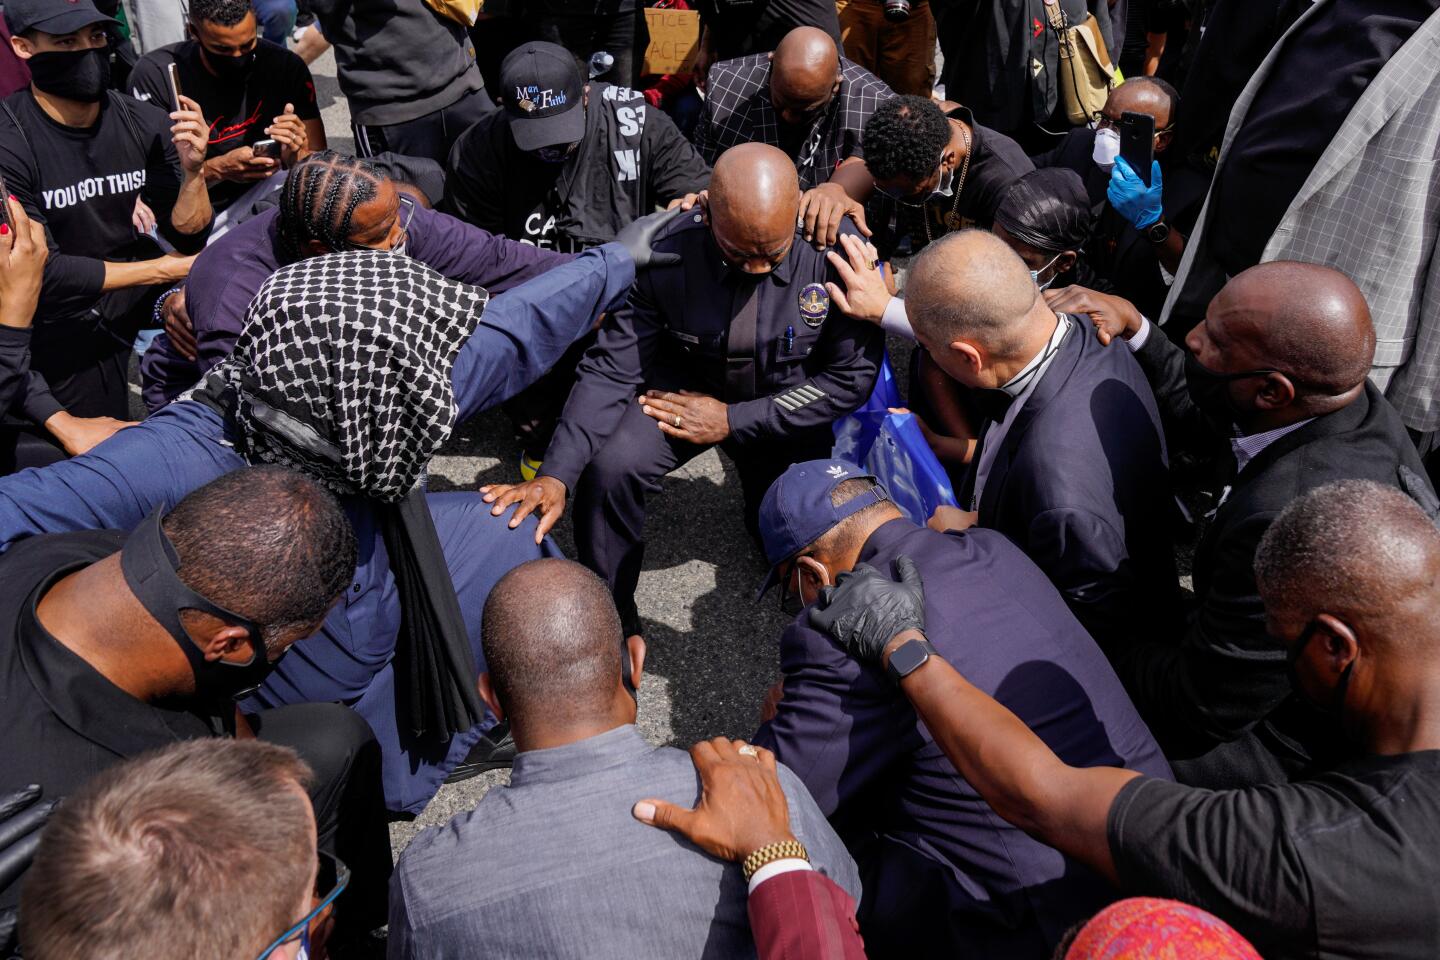 LAPD Cmdr. Gerald Woodyard takes a knee with protesters and L.A. clergy during a march in downtown Los Angeles on Tuesday.